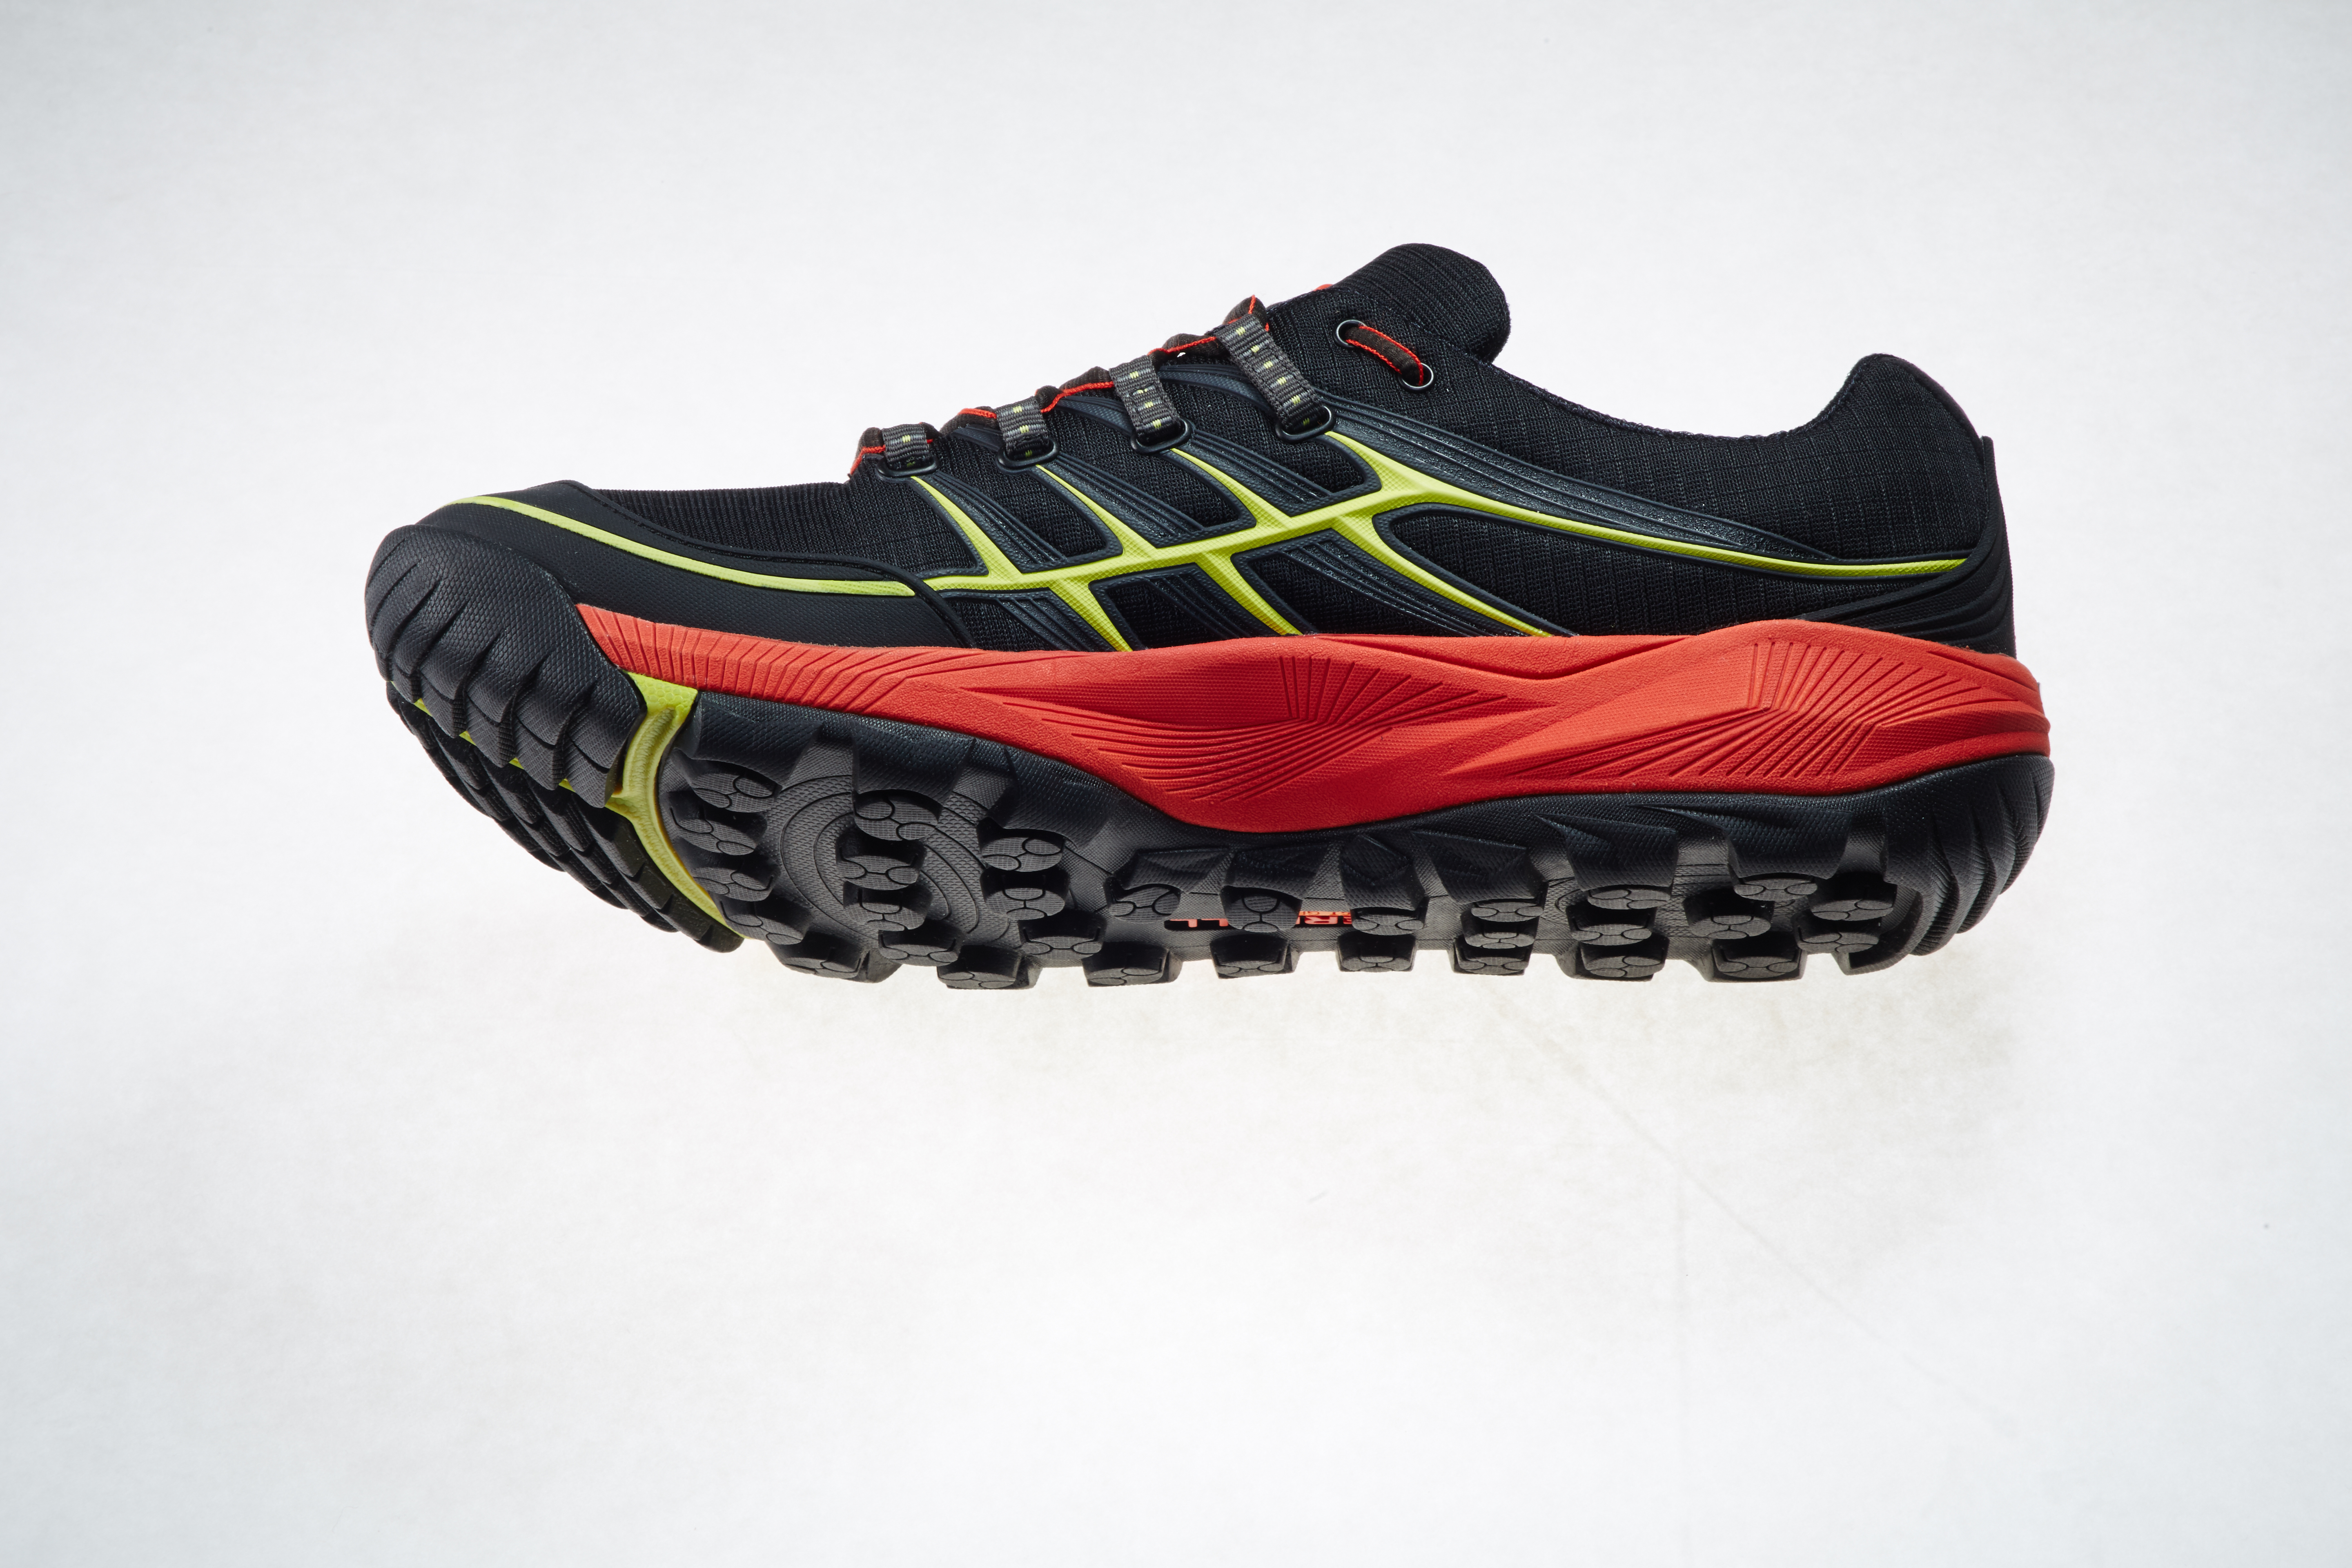 2014 Shoes Guide - Canadian Running